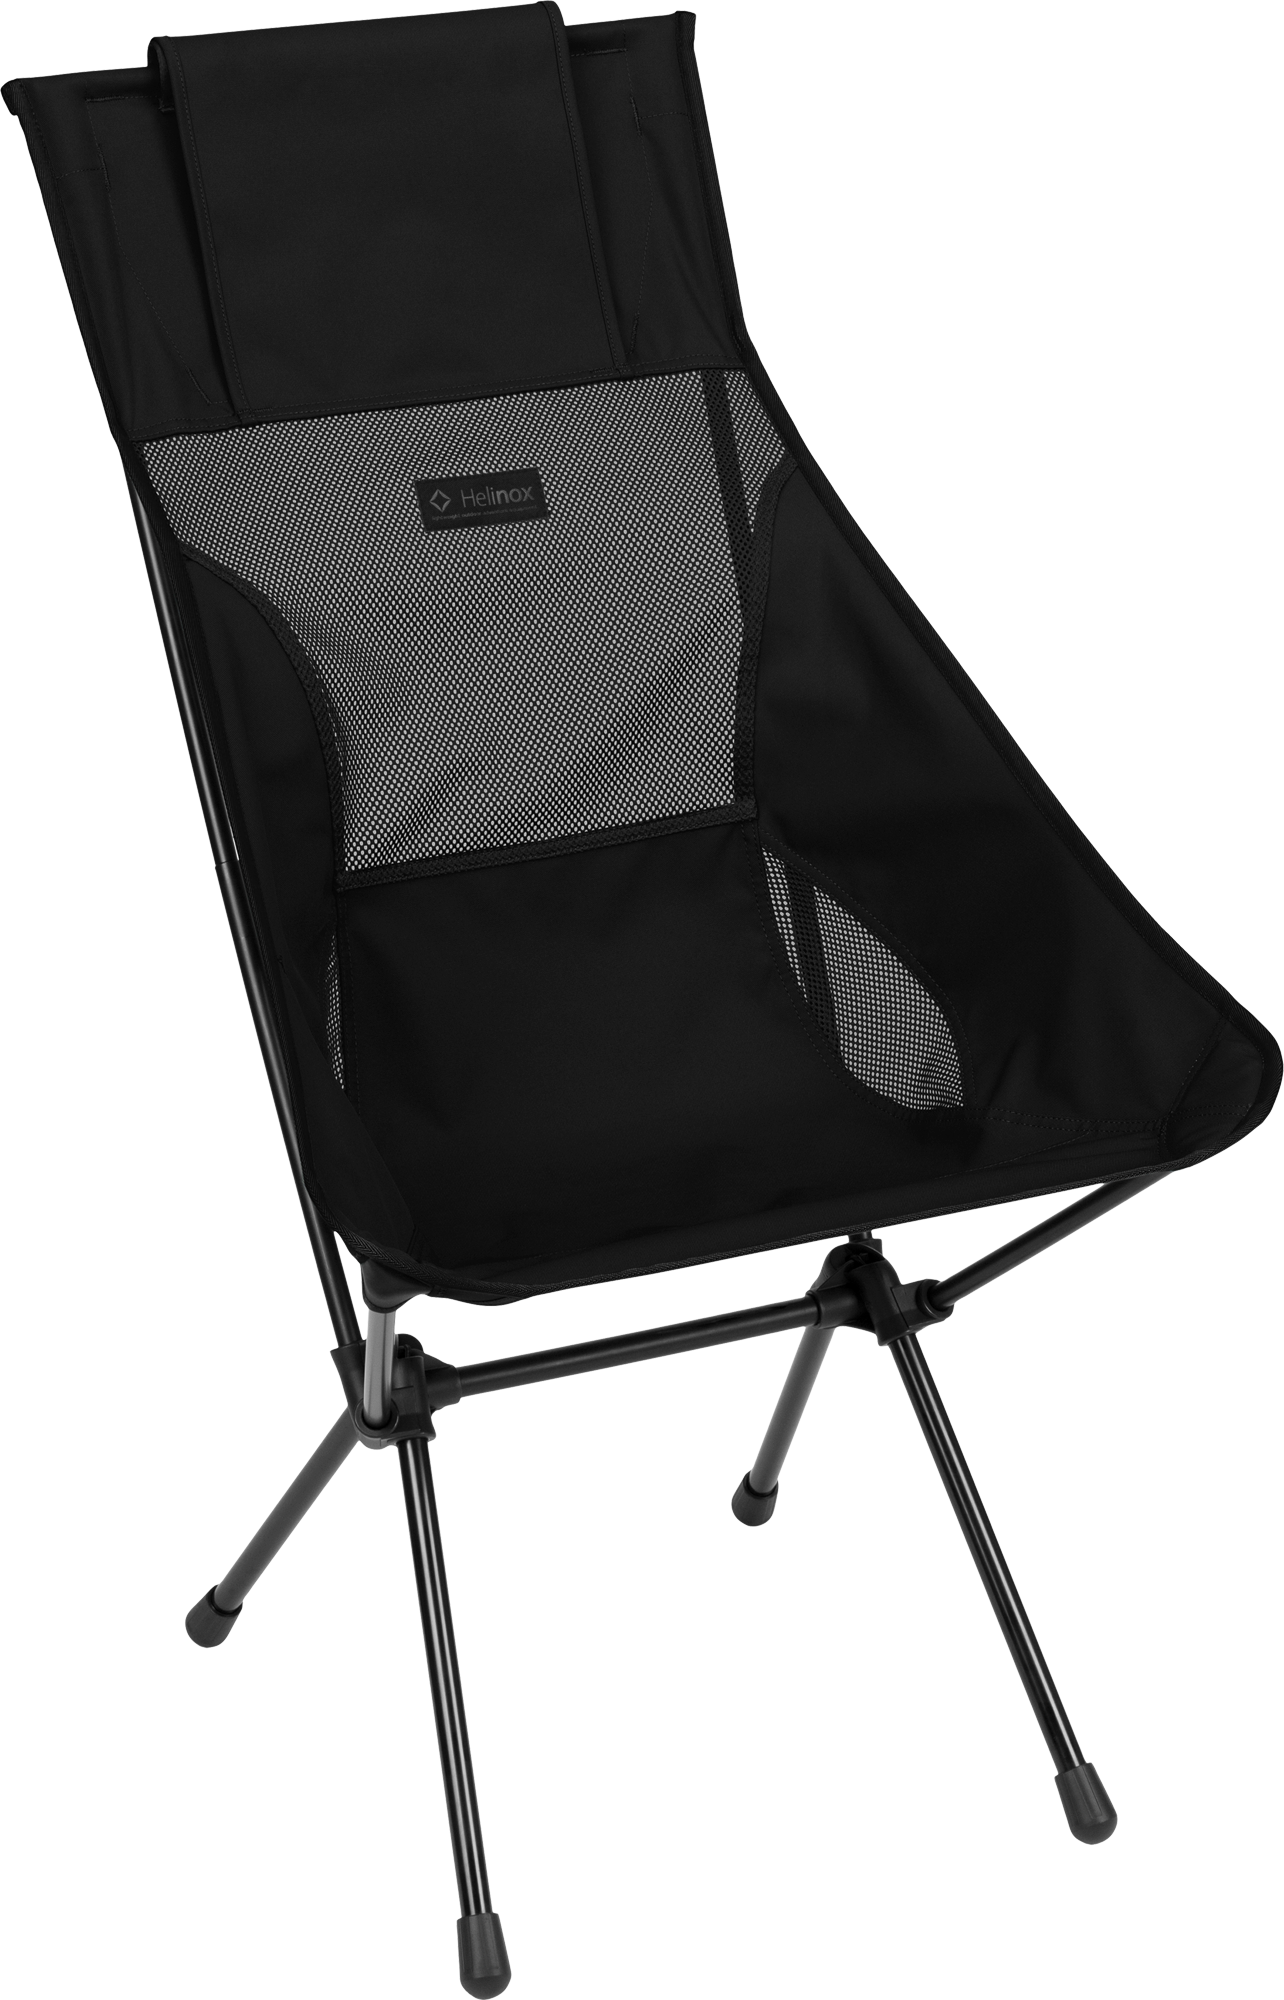 Helinox Sunset Chair Black out